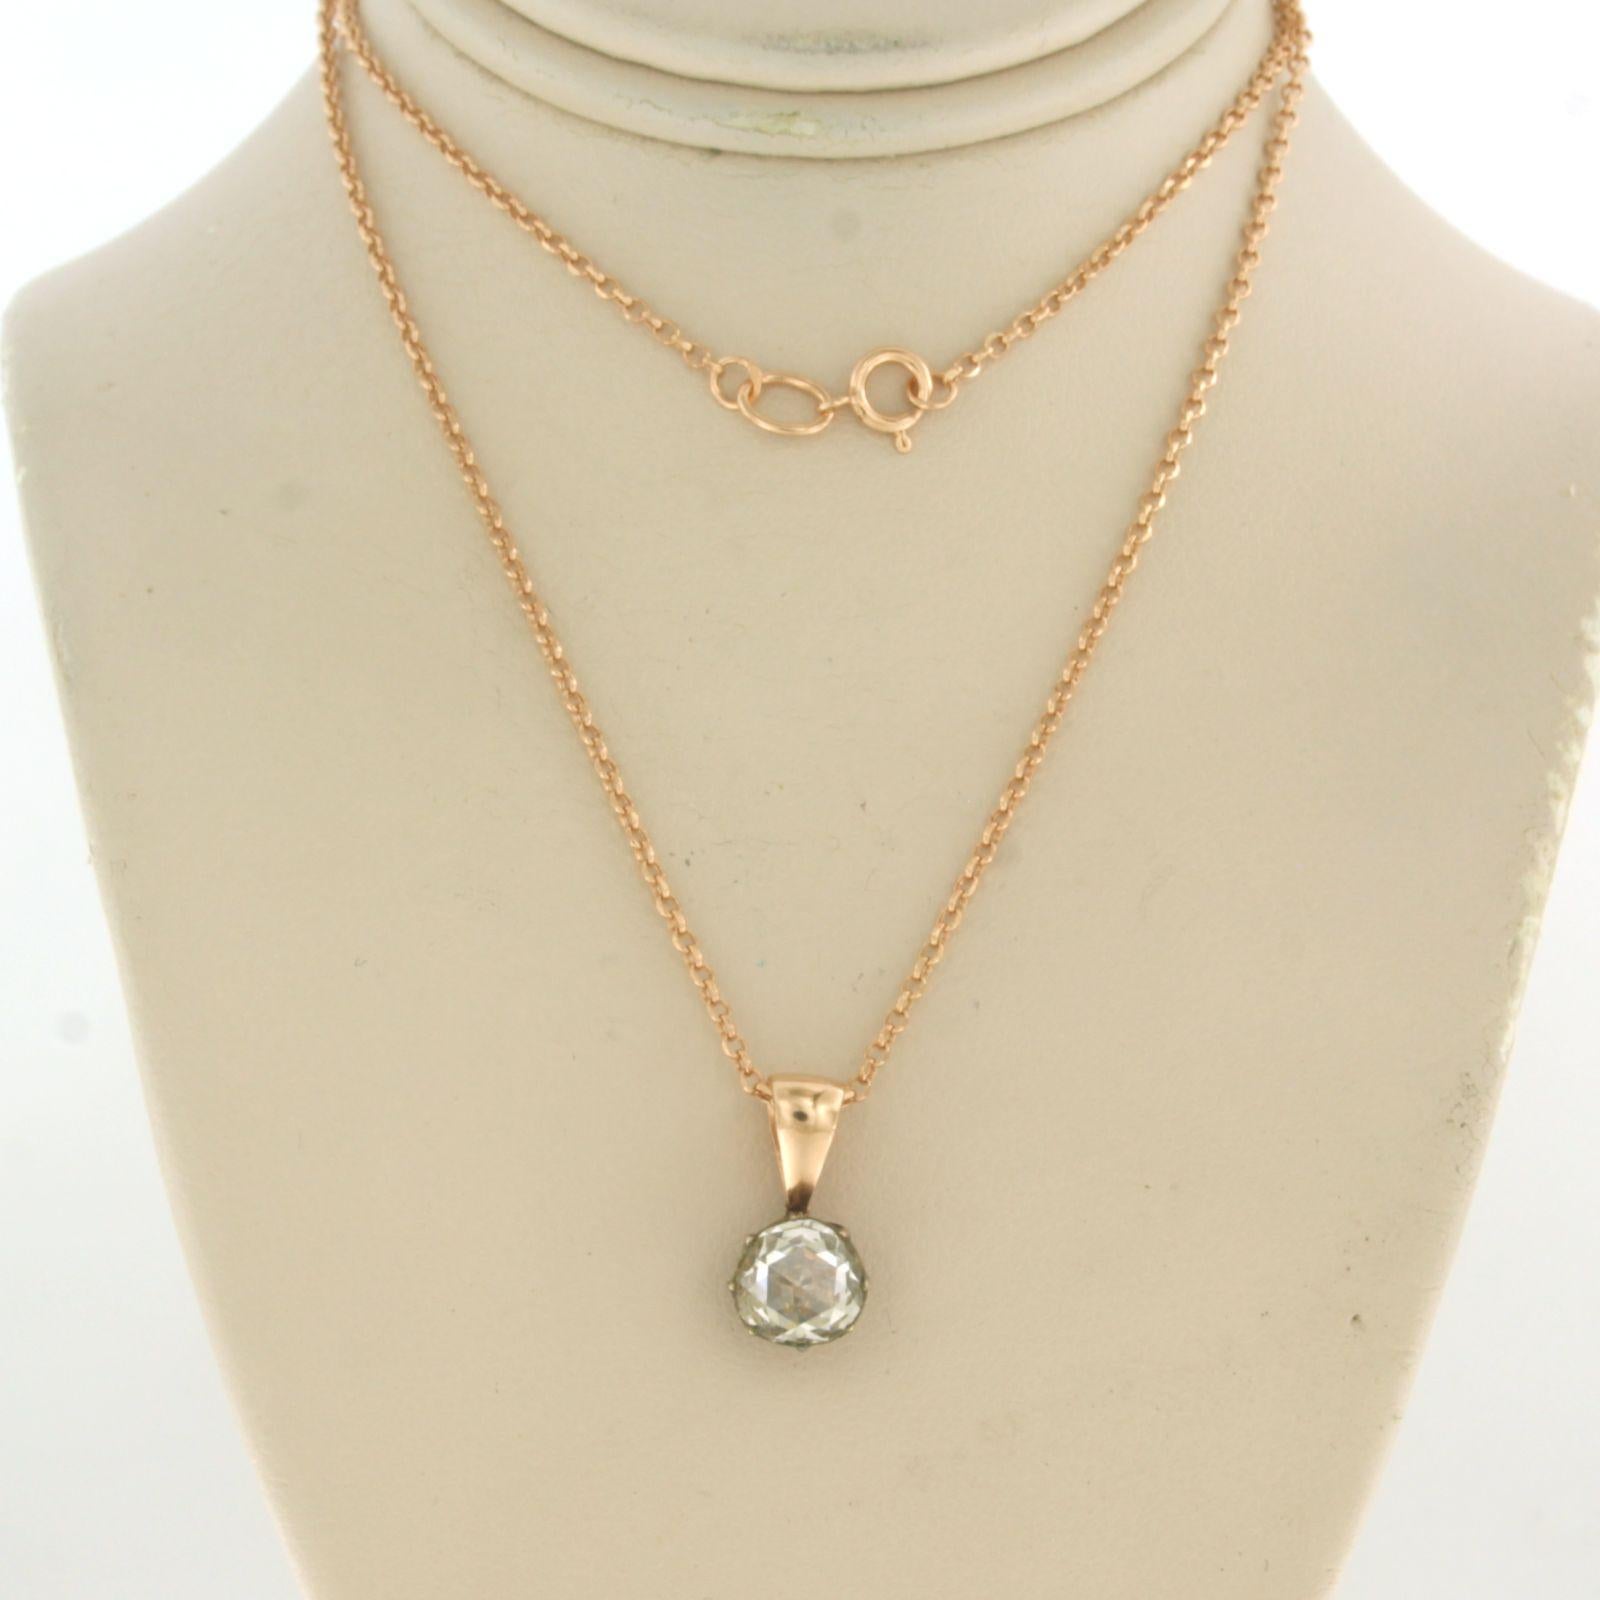 14k rose gold necklace with a solitaire pendant set with rose cut diamonds. 1.00ct – K/L – SI – 45 cm long

detailed description:

the necklace is 45 cm long and 0.7 mm wide

the pendant is 1.5 cm long by 8.0 mm wide

weight 2.2 grams

occupied